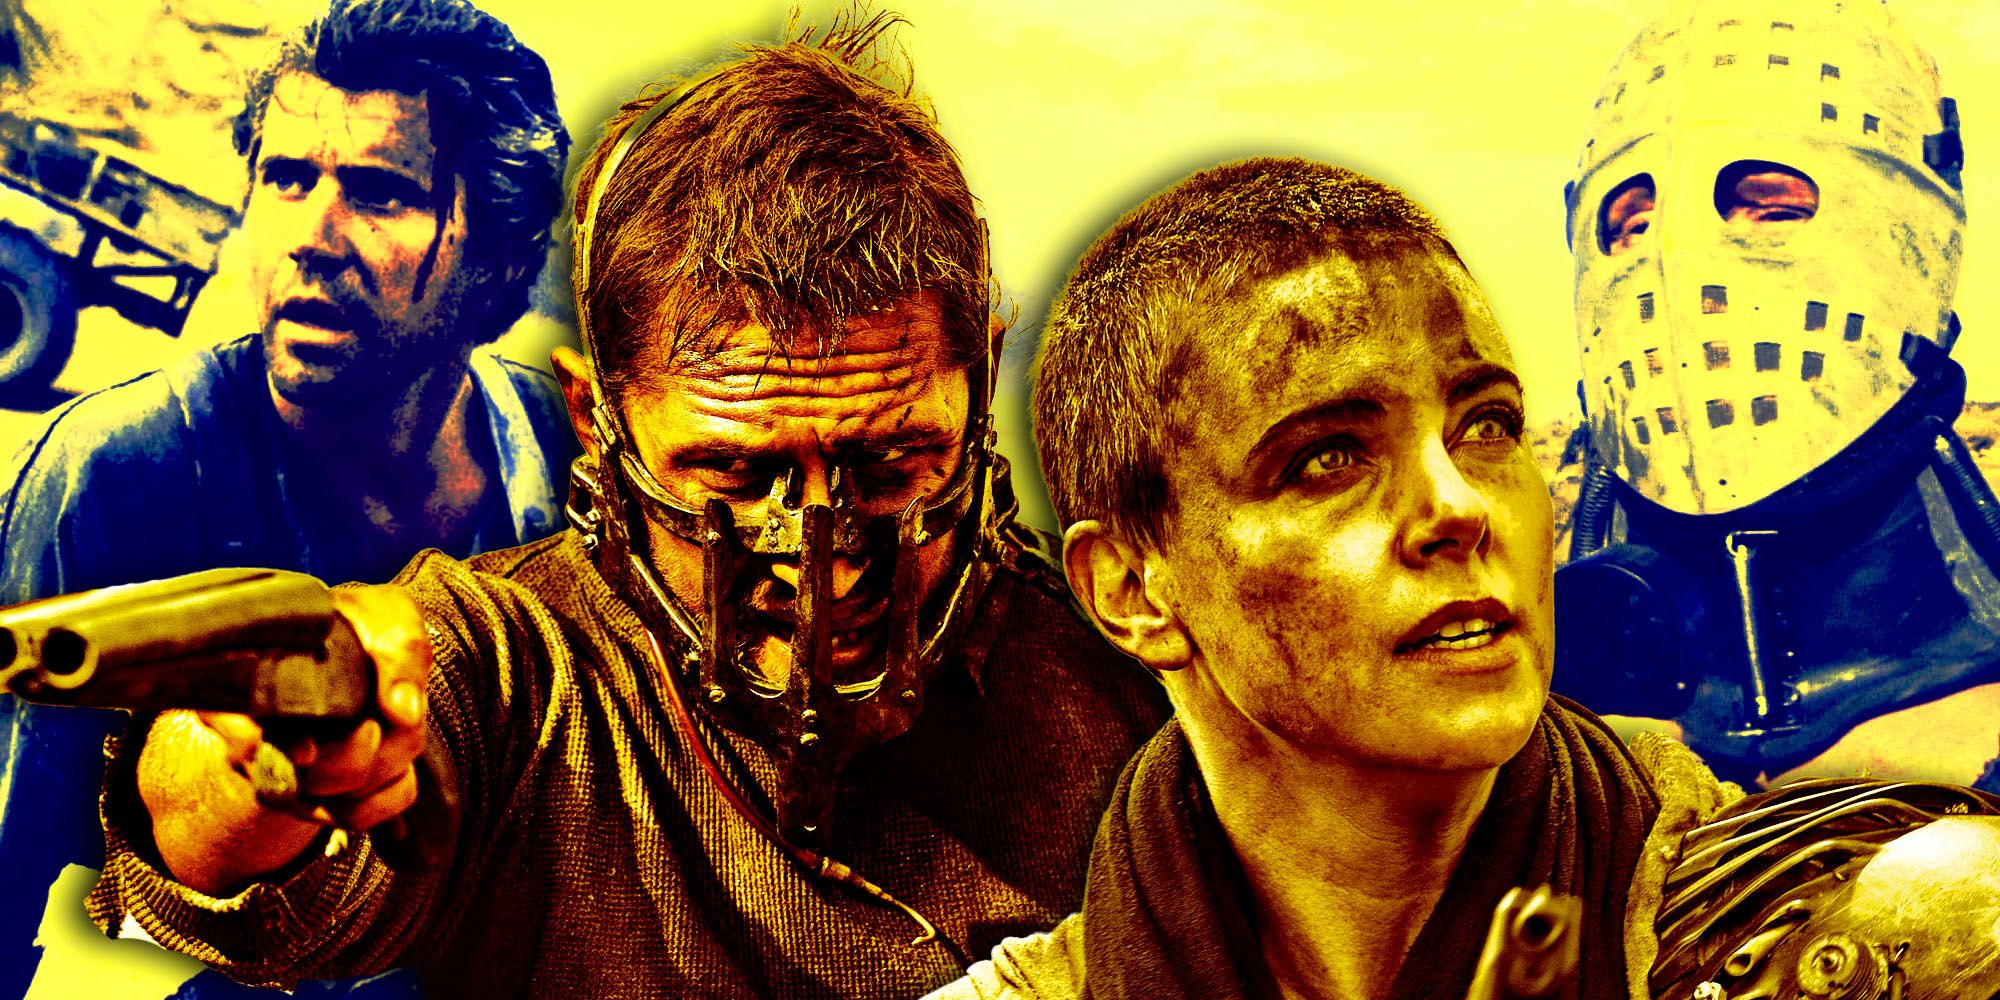 Collage of Mad Max characters includes actors Mel Gibson, Tom Hardy, and Charlize Theron